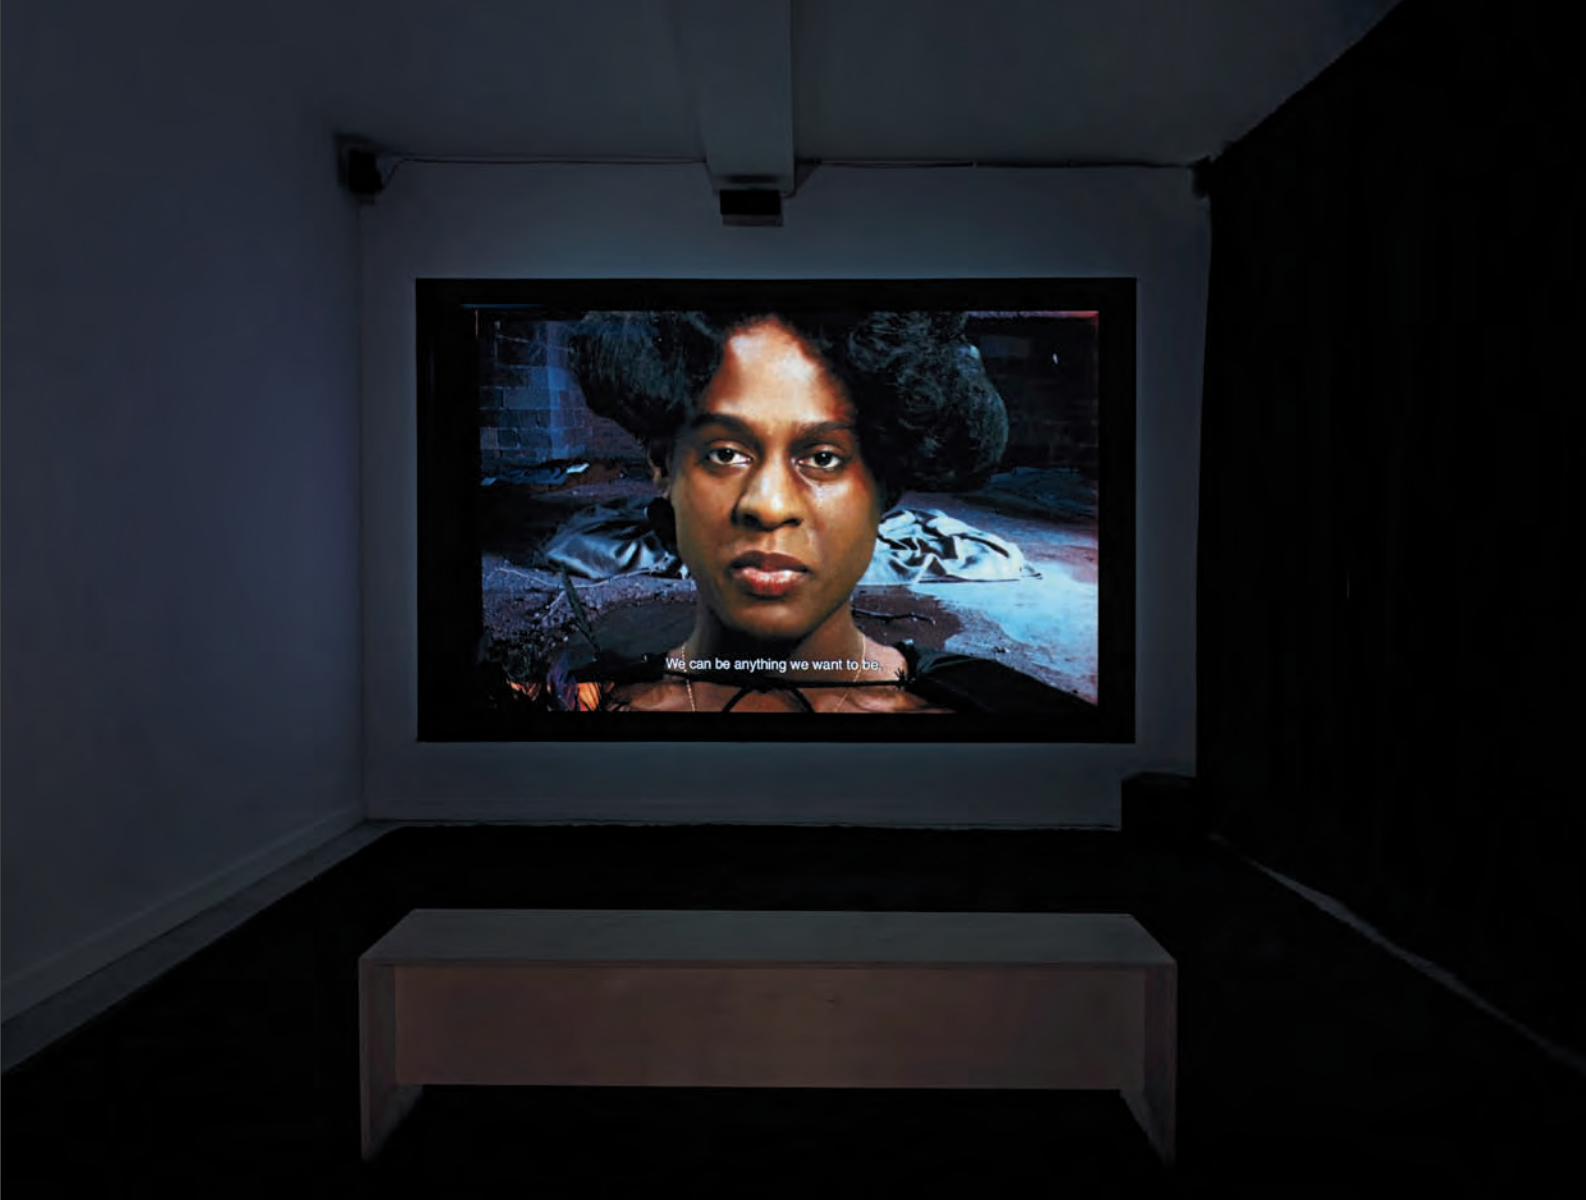 Tourmaline, Salacia, 2019, 16 mm film, color,sound, 6:04 min., installation view, Chapter, NY(artwork © Tourmaline; photograph by DarioLasagni, provided by the artist and Chapter NY,New York)